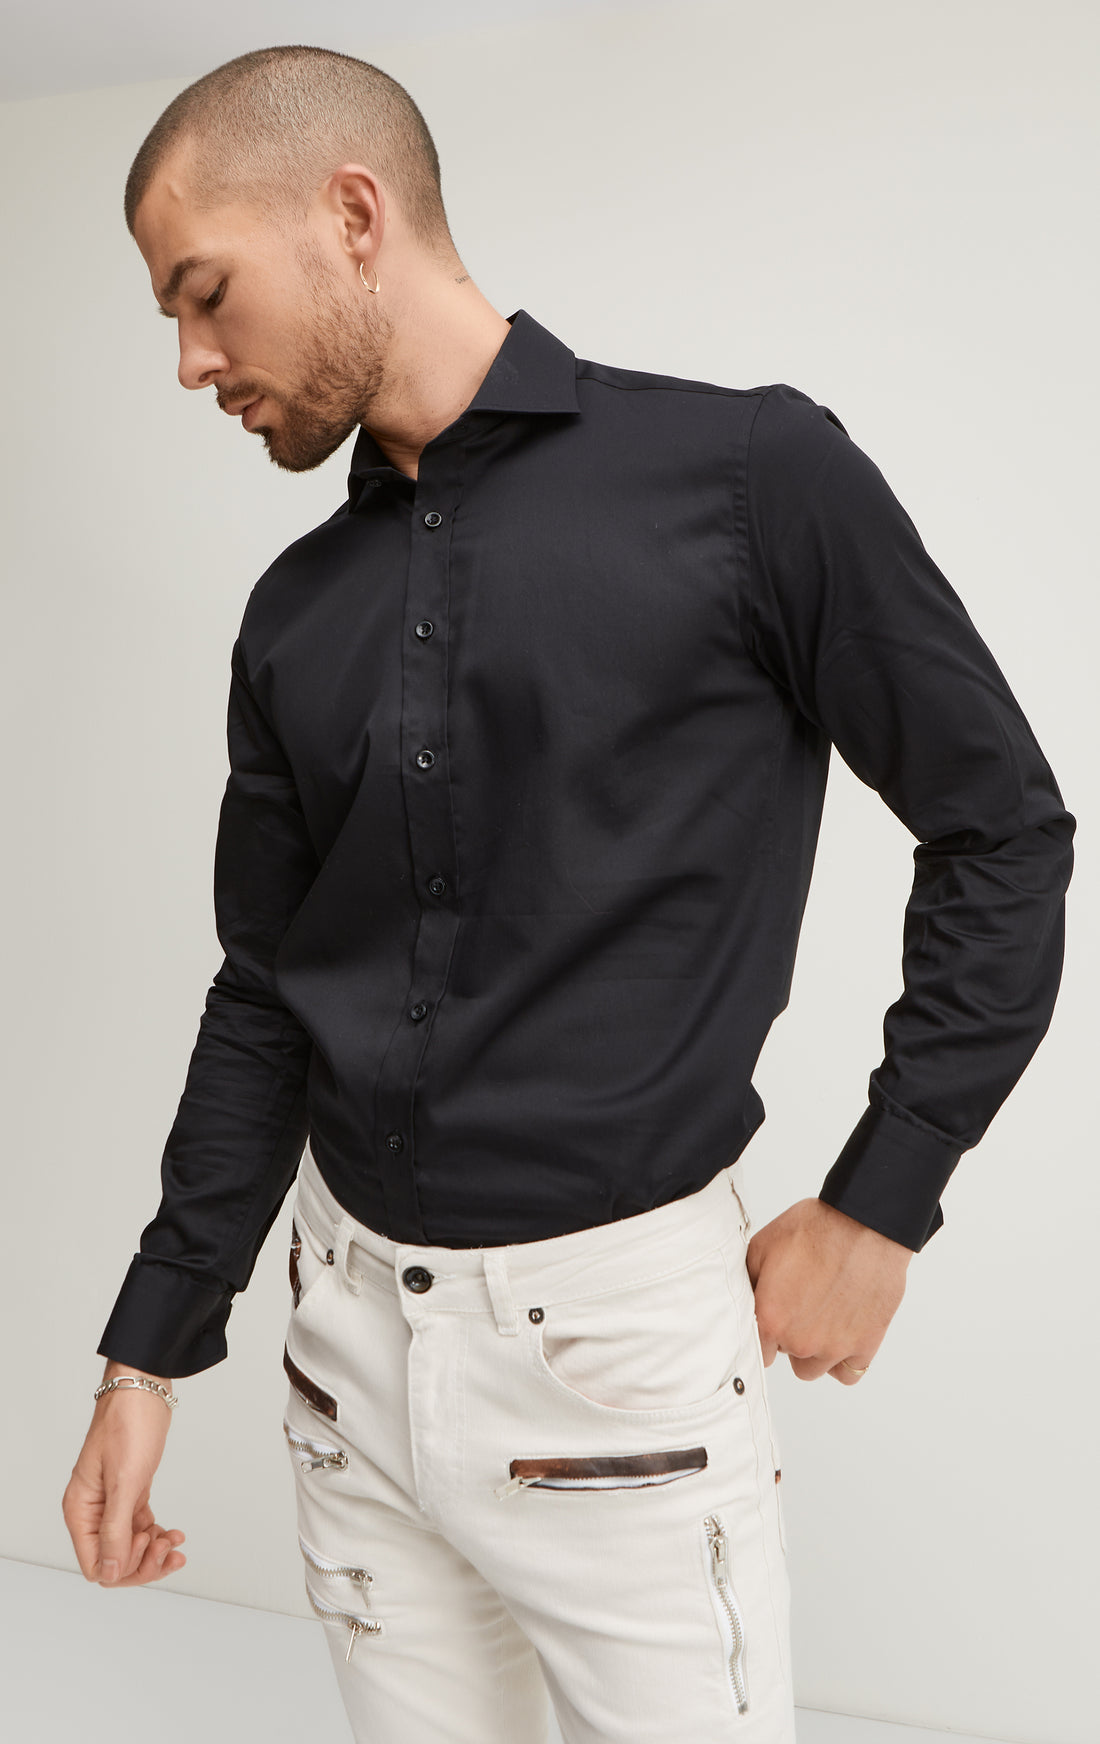 N° 4810 PURE COTTON SPREAD COLLAR FITTED DRESS SHIRT - JET BLACK